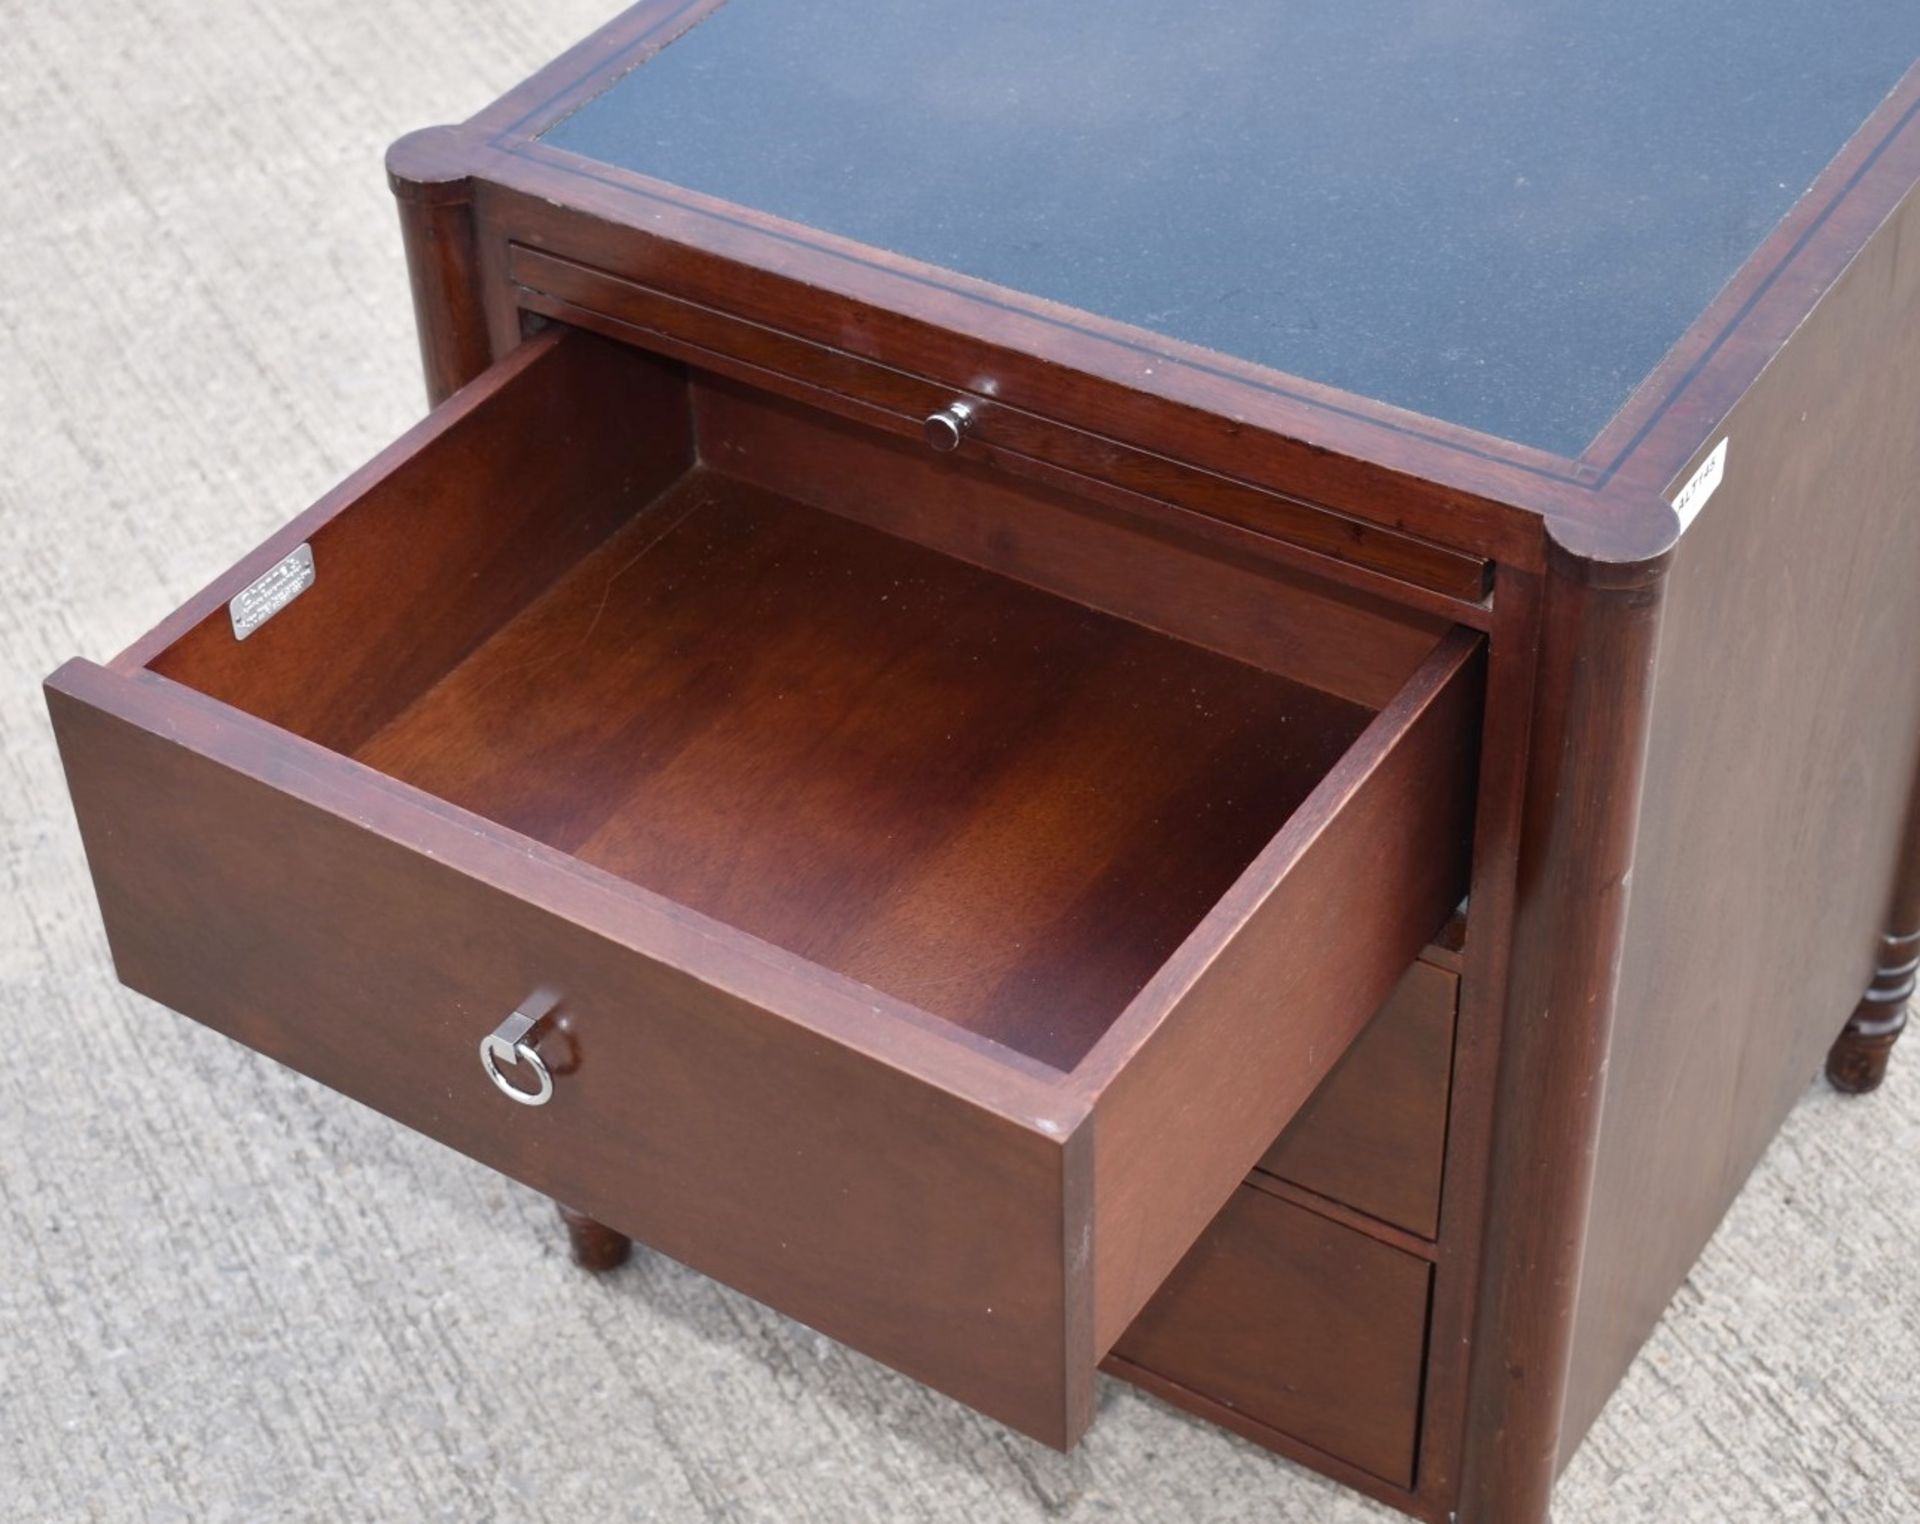 1 x CHANNELS Classically Styled Designer Solid Wood End Table with Pull-Out Tray, 1-Drawer Storage - Image 5 of 5